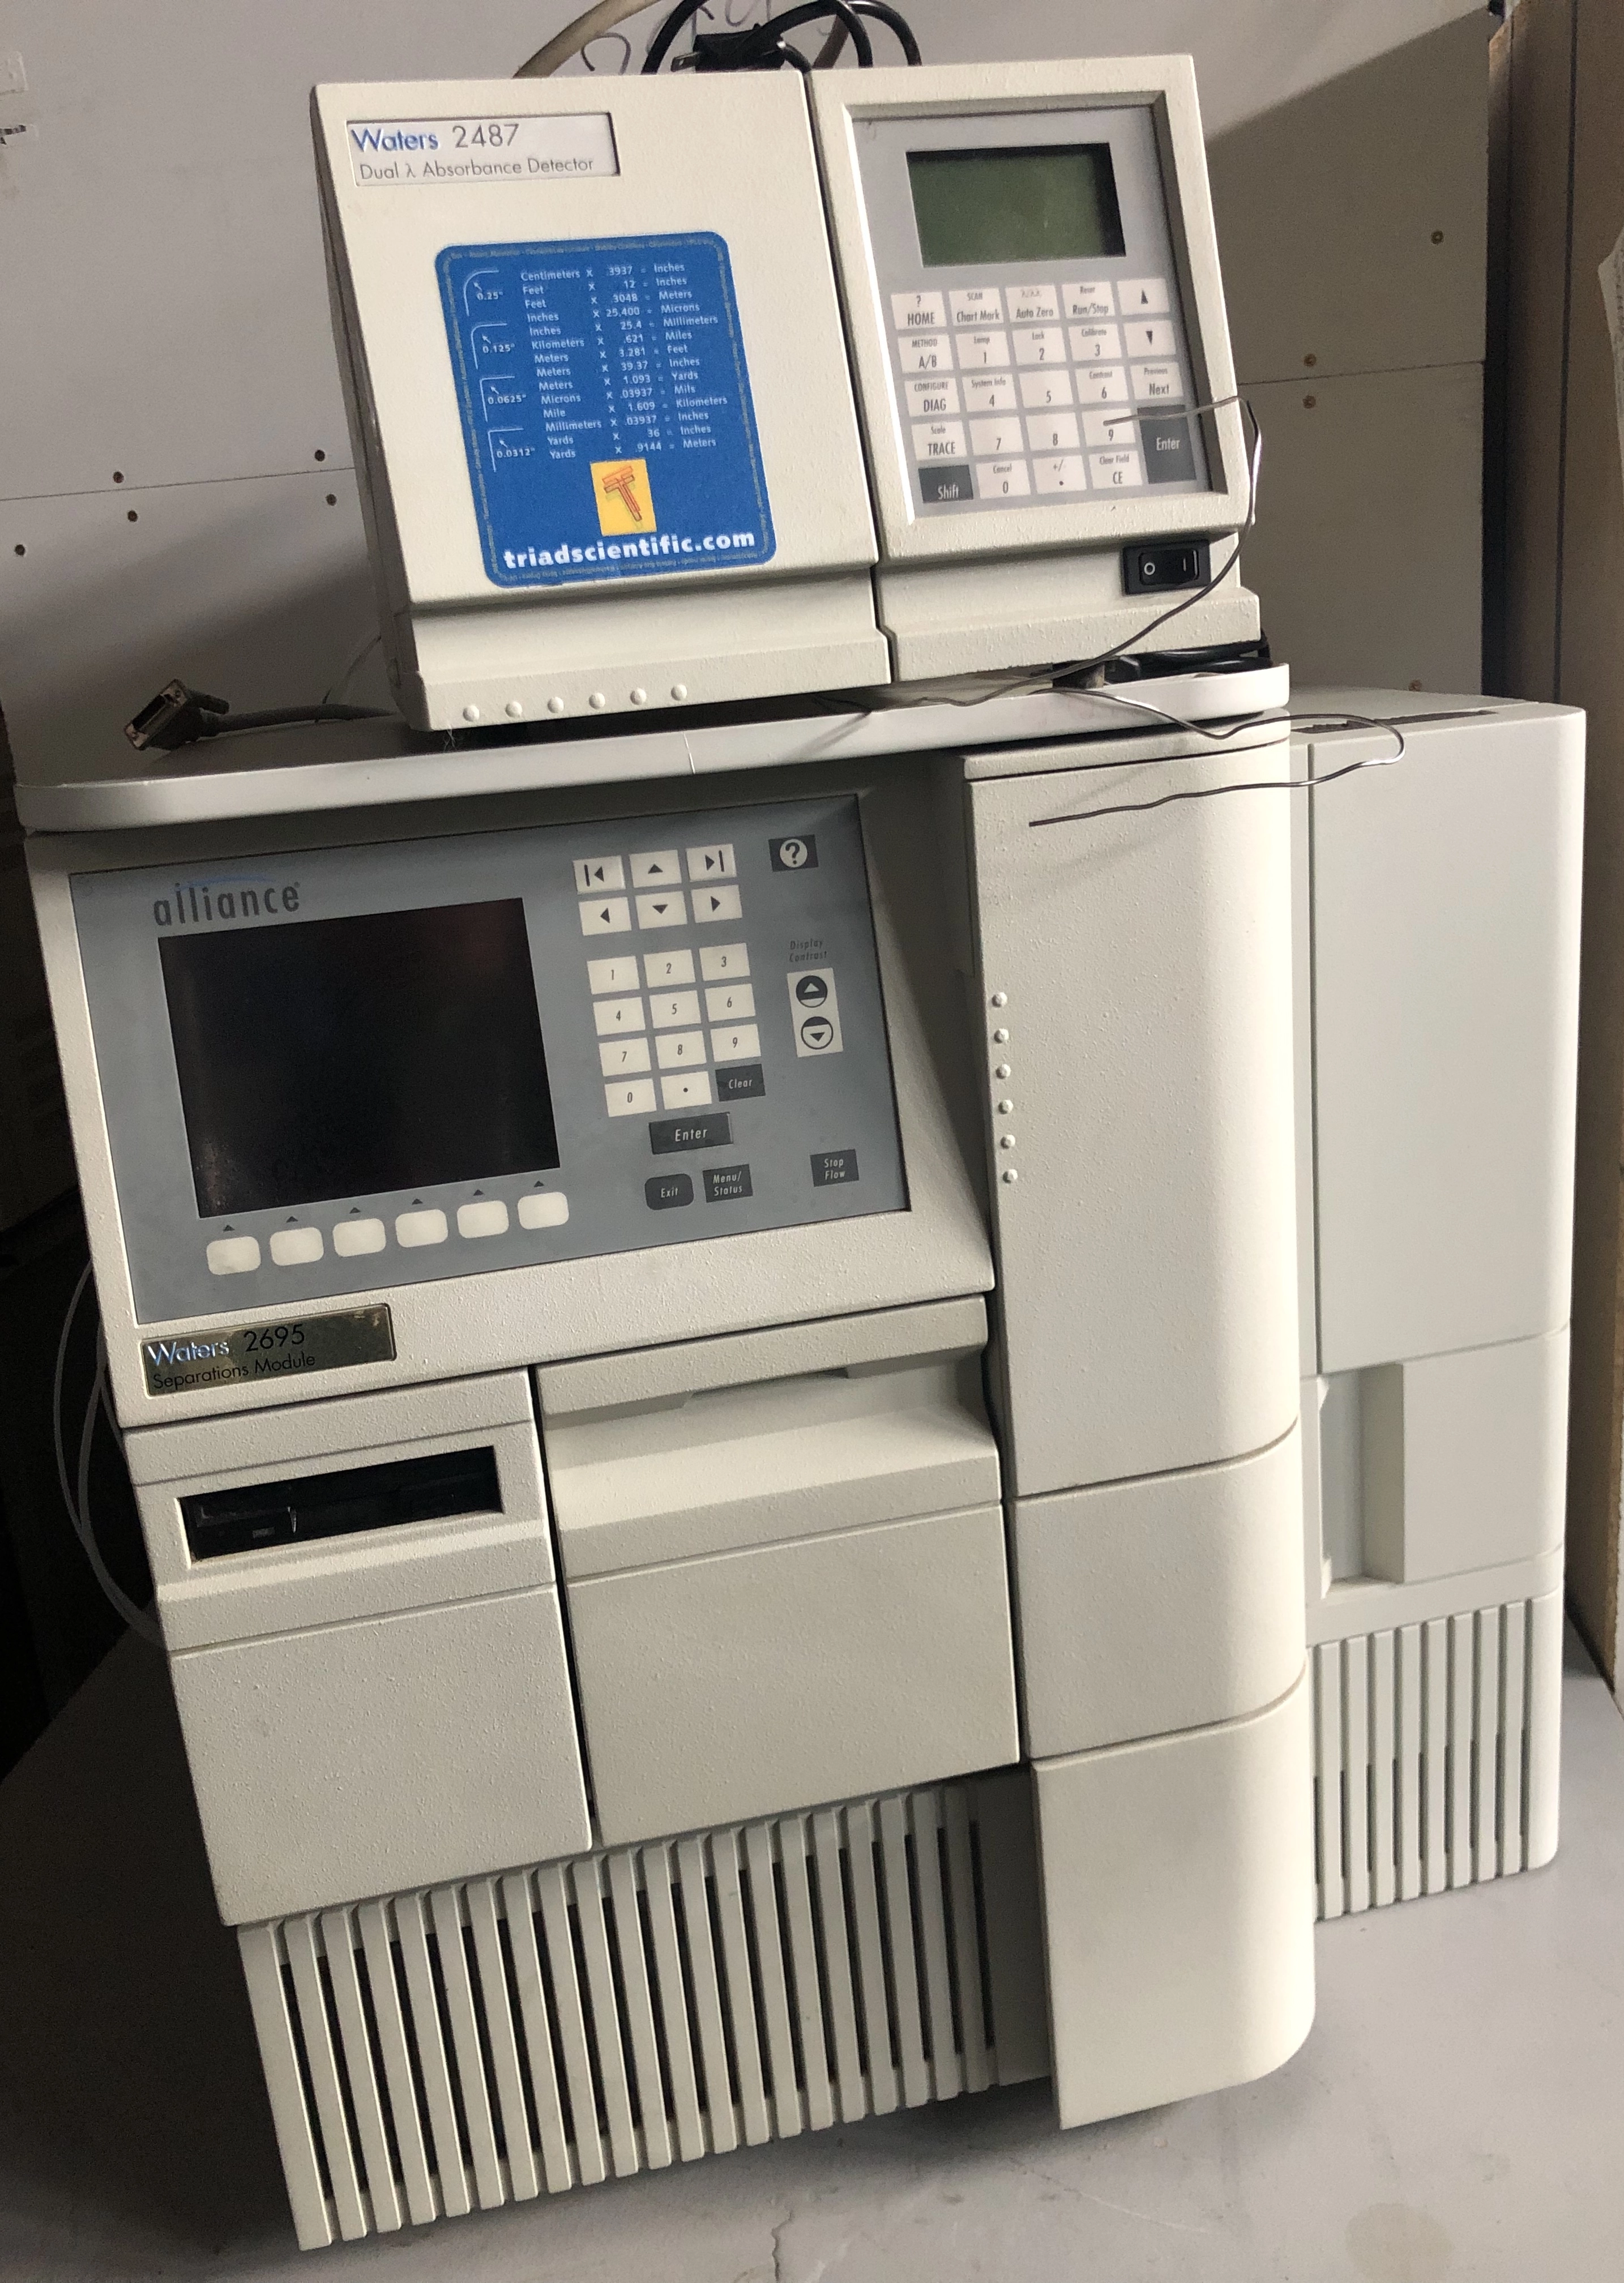 Waters 2695 HPLC system sale and Waters 2487 Detector on sale